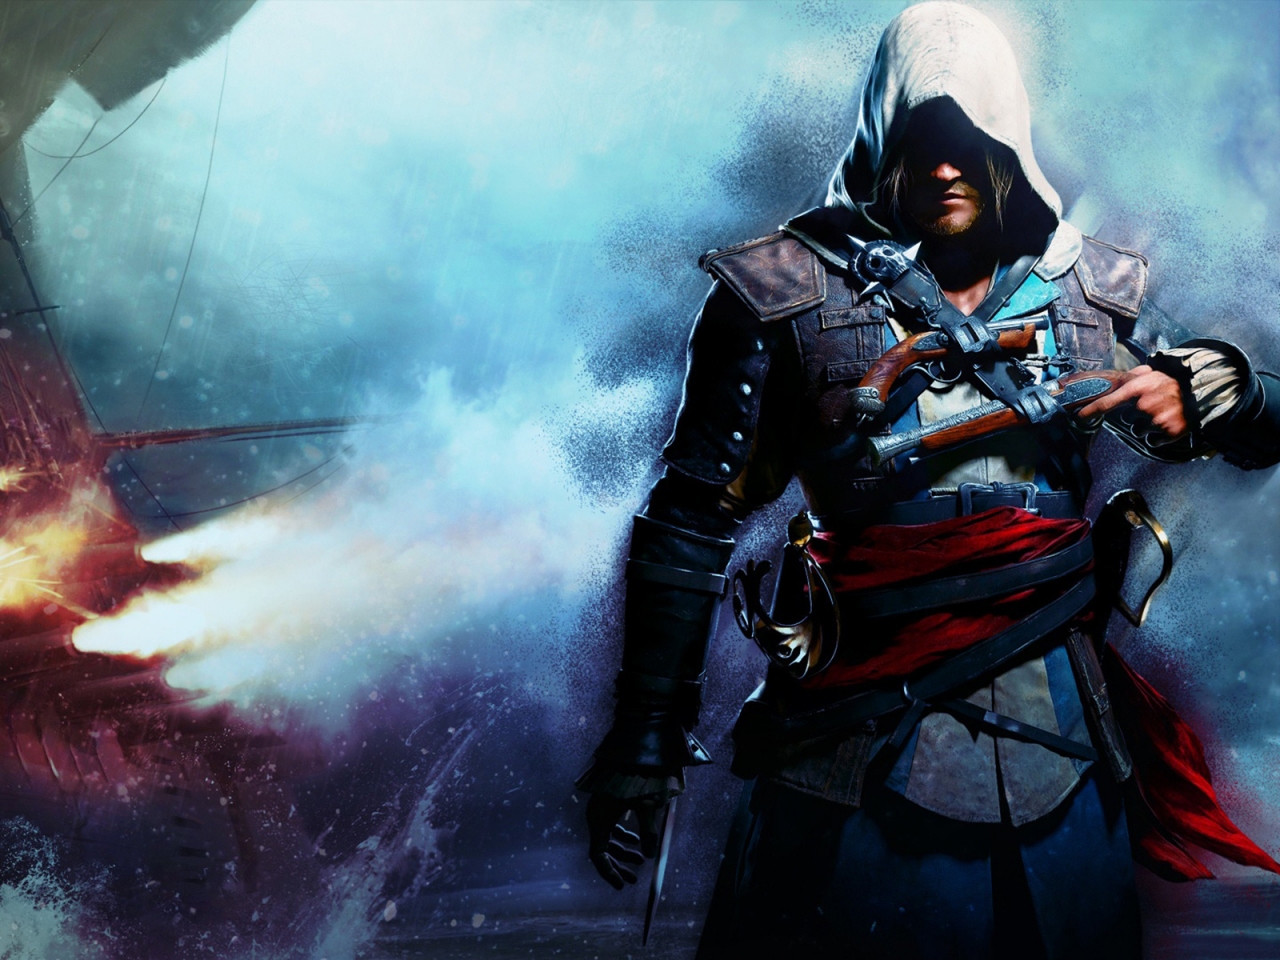 Assassins Creed 4 Black Flag for 1280 x 960 resolution